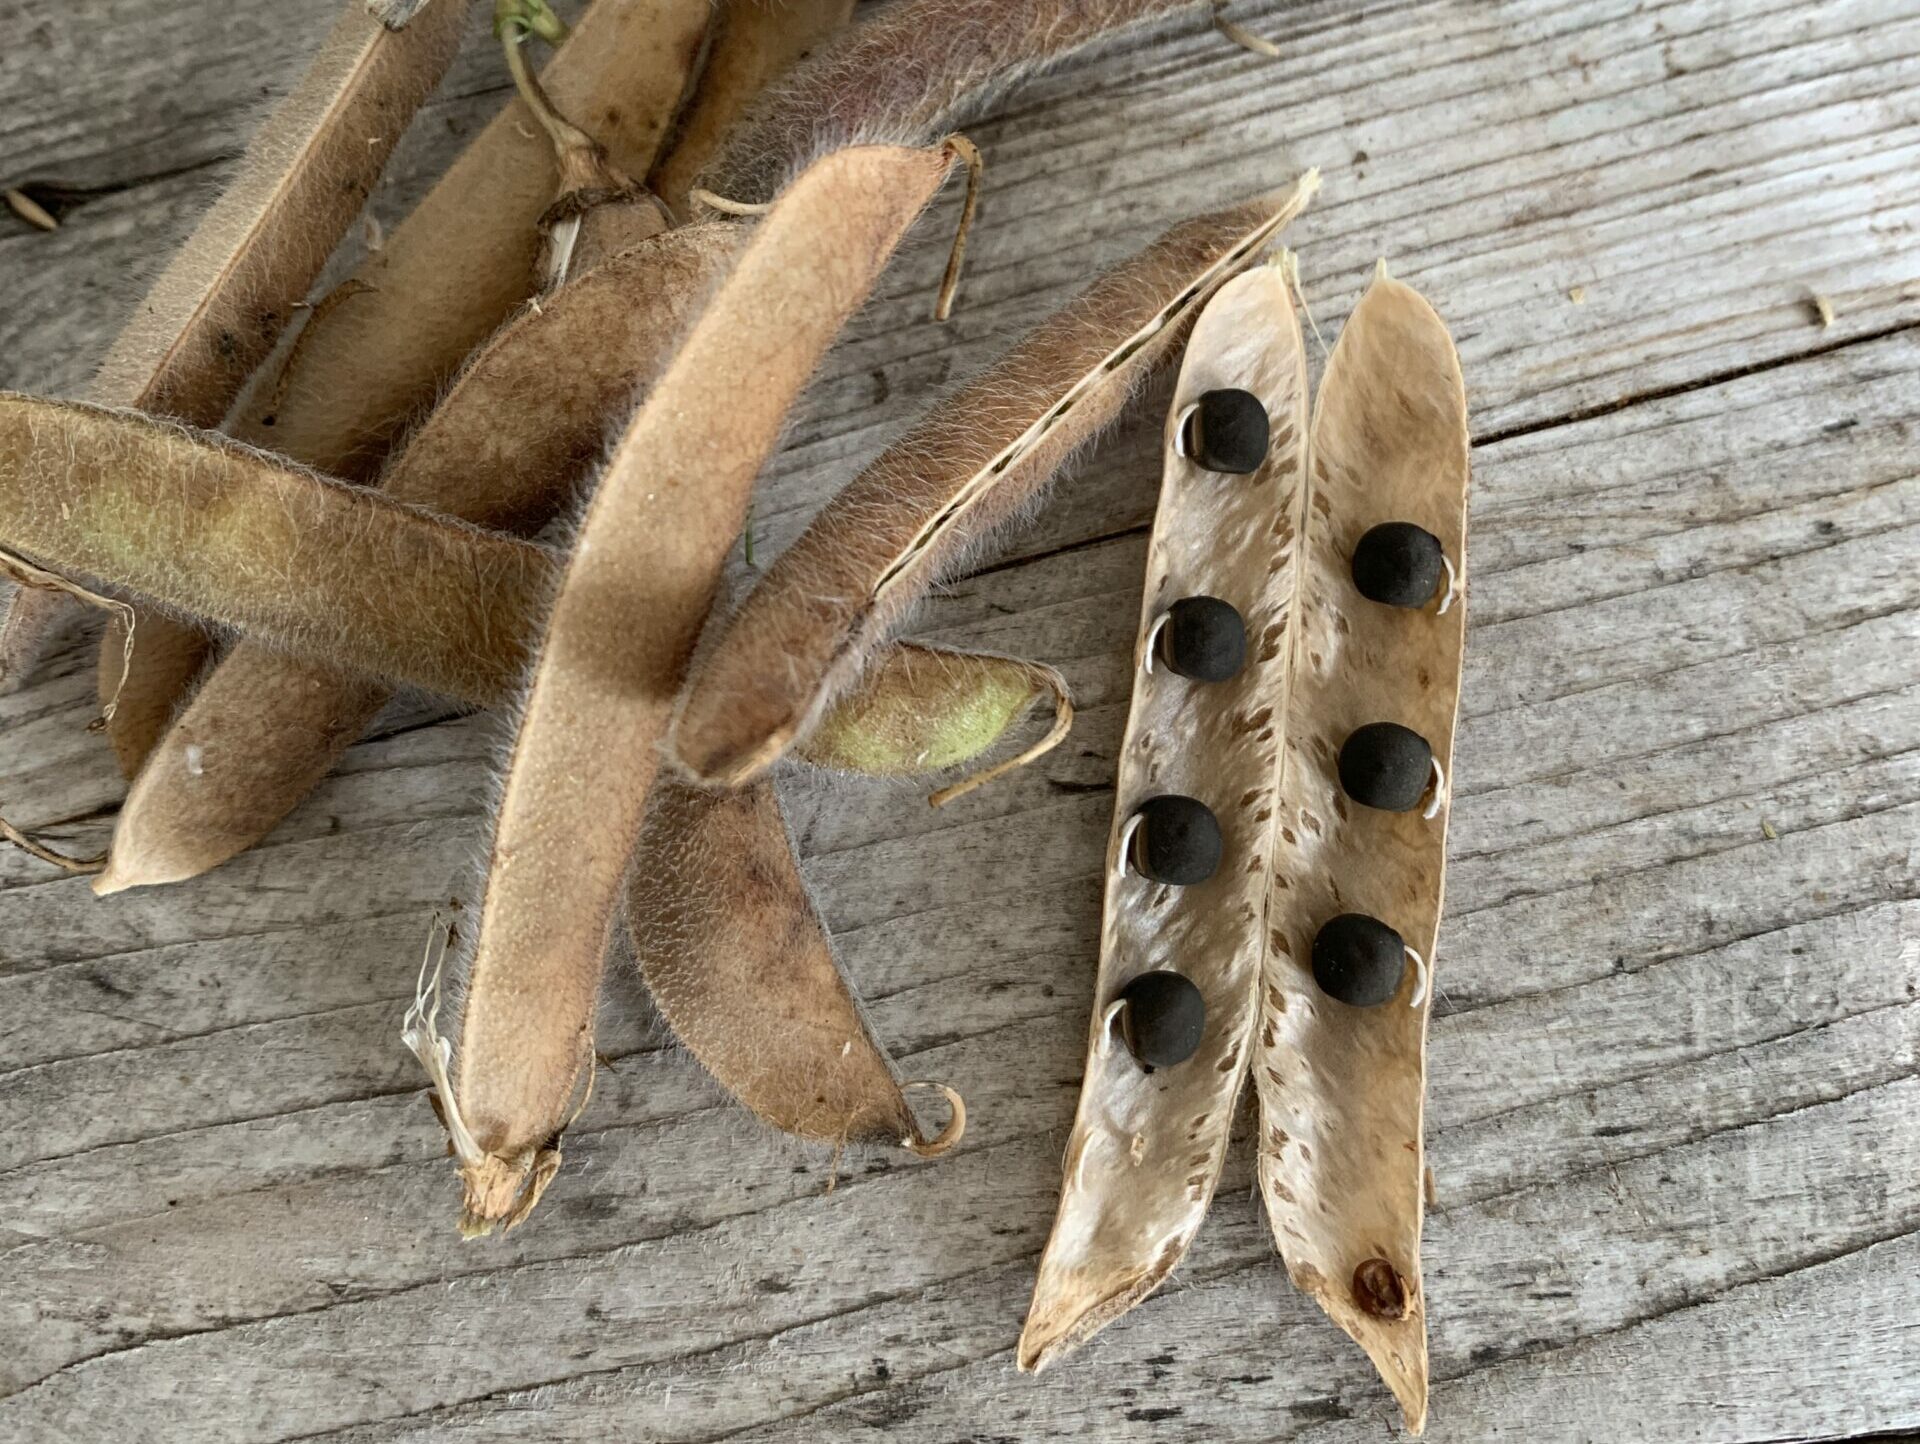 Dried sweet pea pods reveal jet black seeds when opened